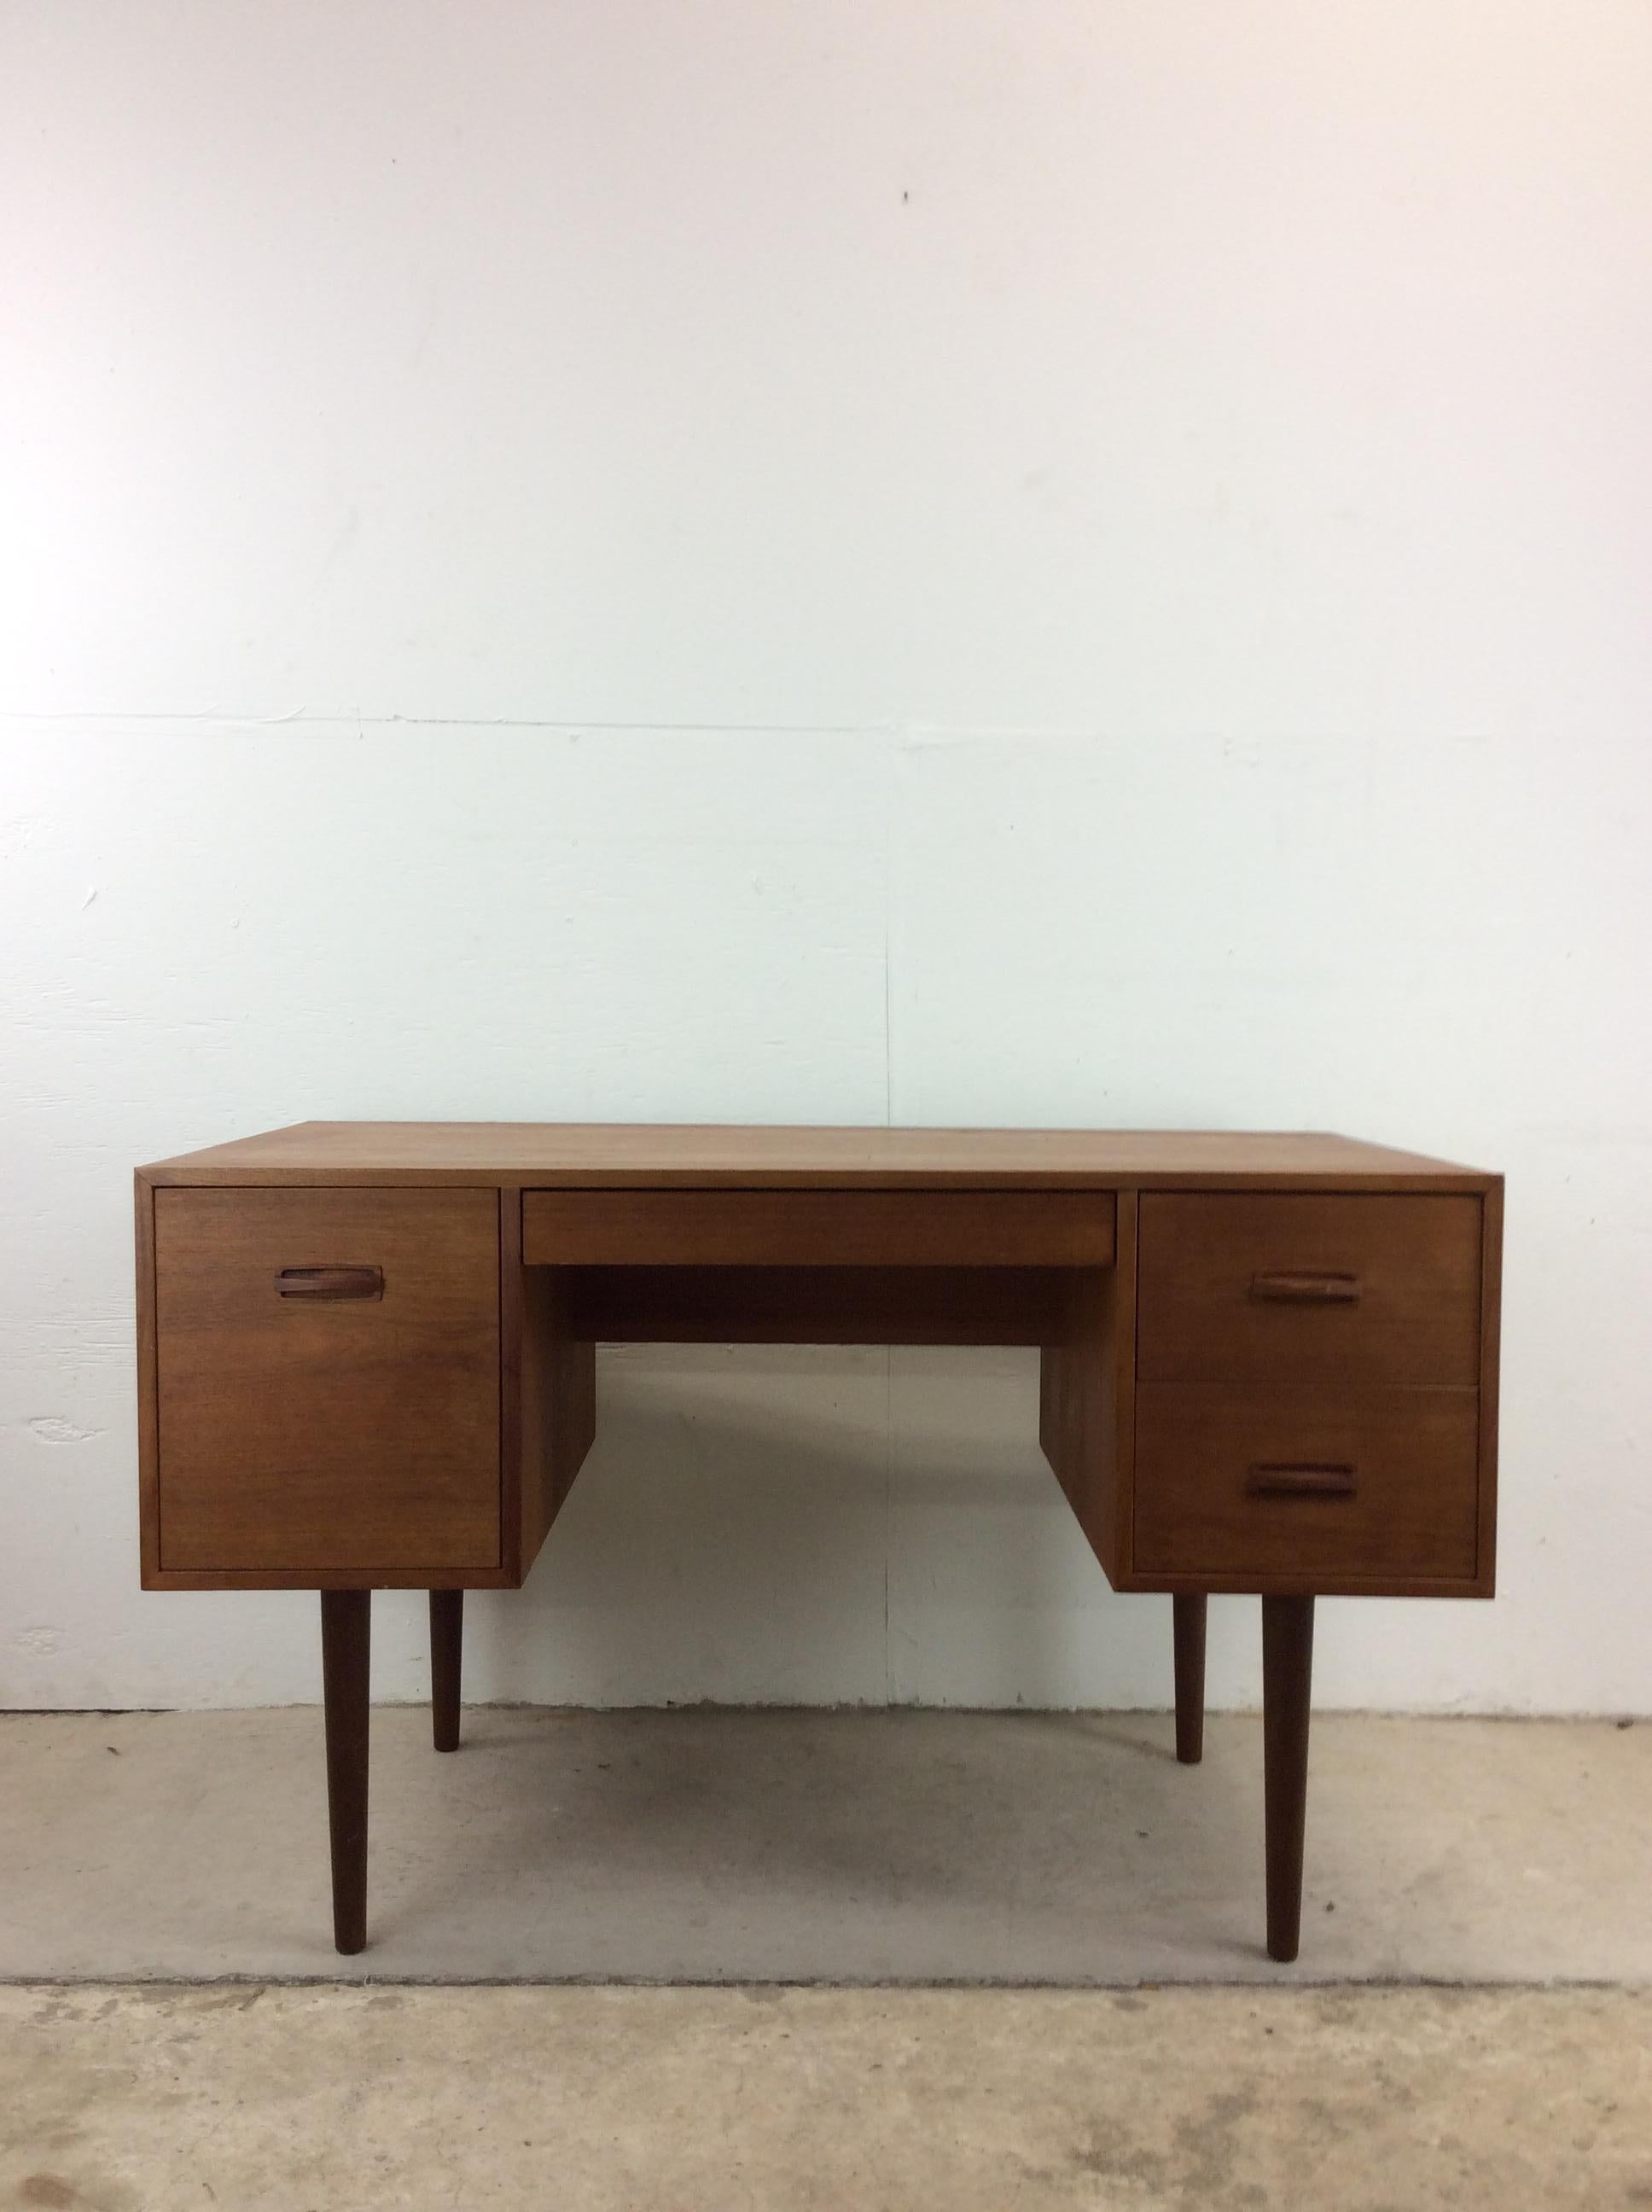 This Danish modern writing desk features pressed wood construction, original teak veneer, four dovetailed drawers with carved wood pulls, finished back and tall tapered legs. 

Please see our listings for complimentary Danish Modern pieces.